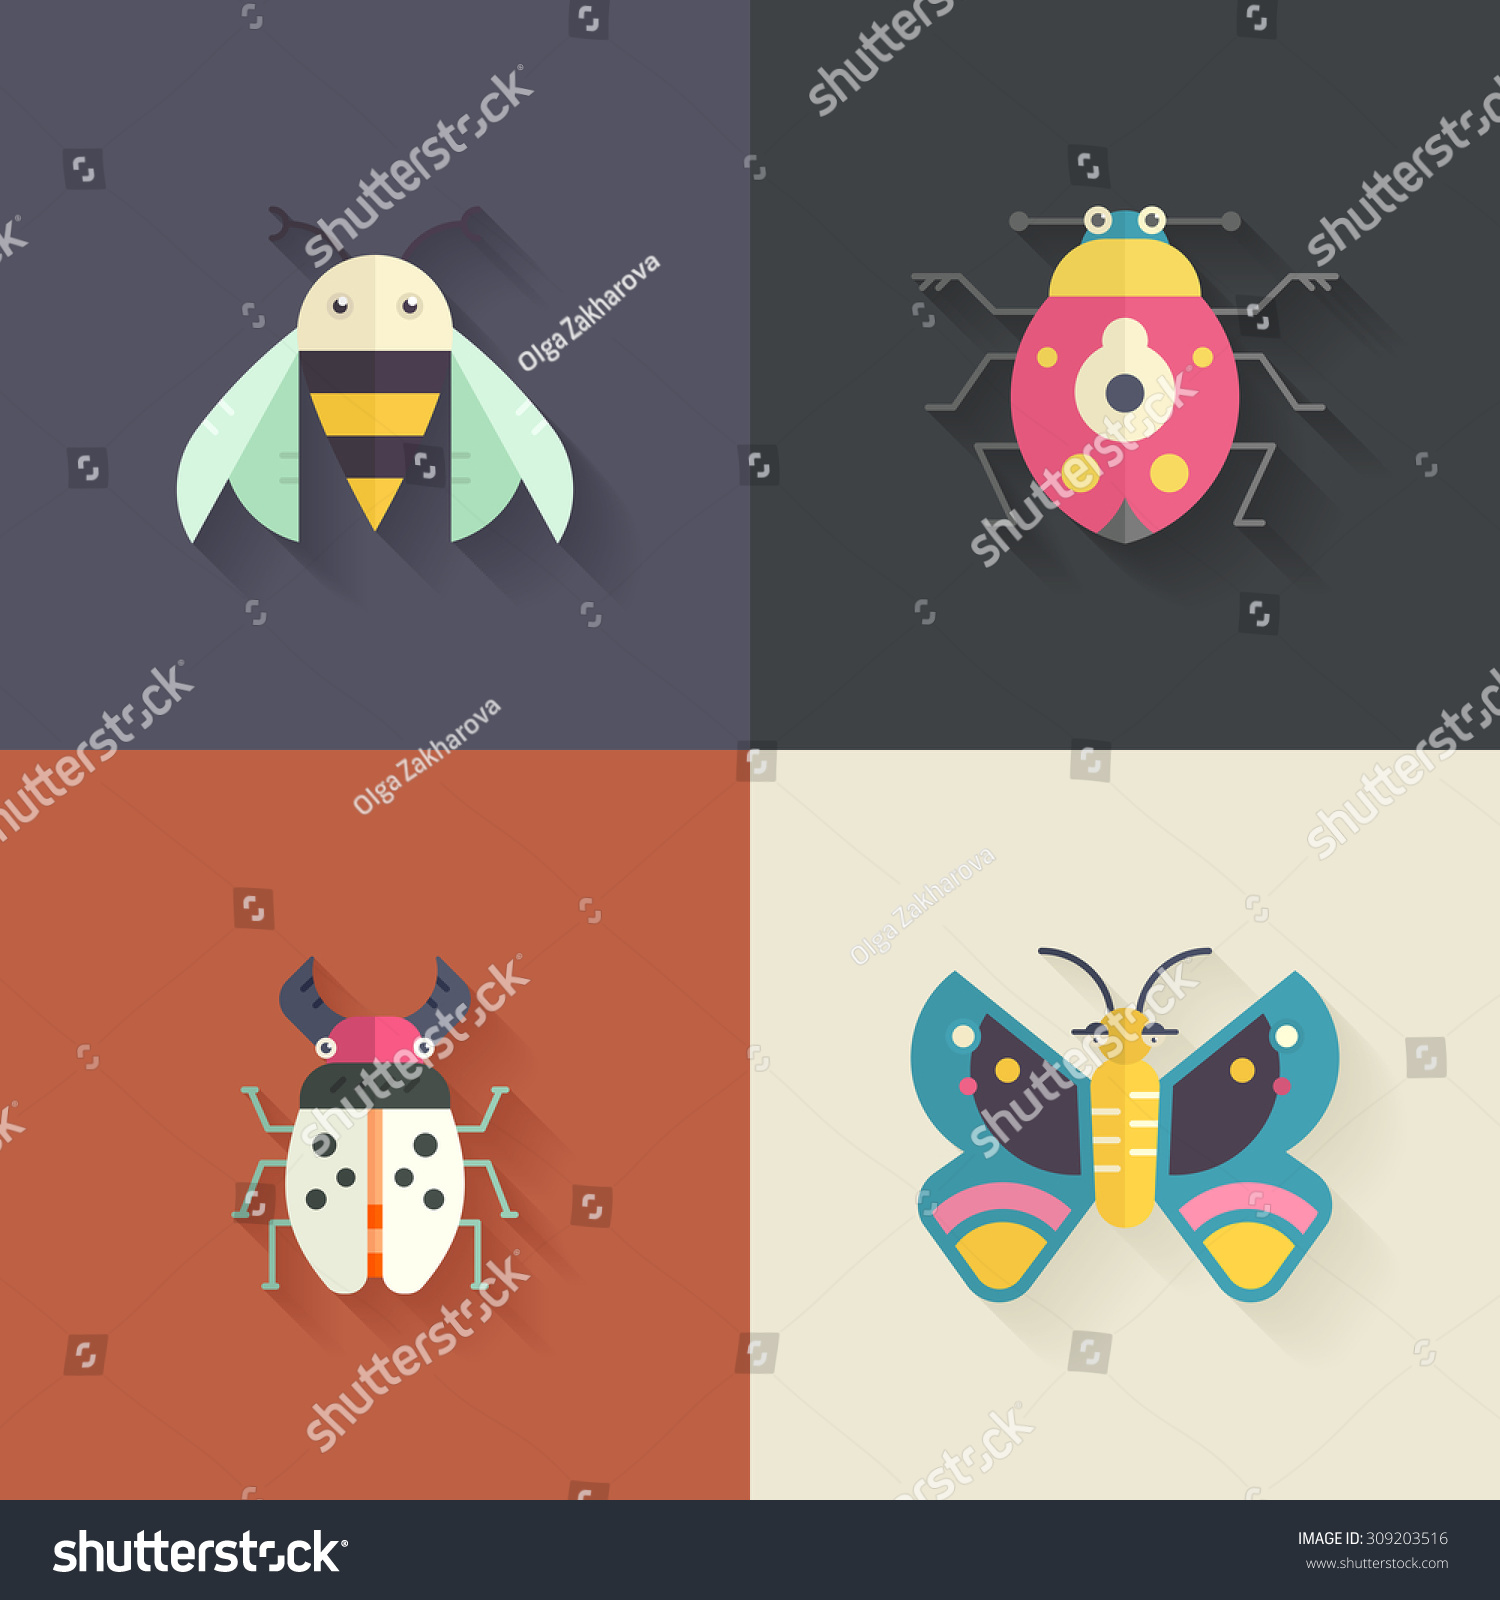 SVG of Collection of four insects made in flat vector style with shadow. Butterfly, bug, bee and dor-beetle. svg